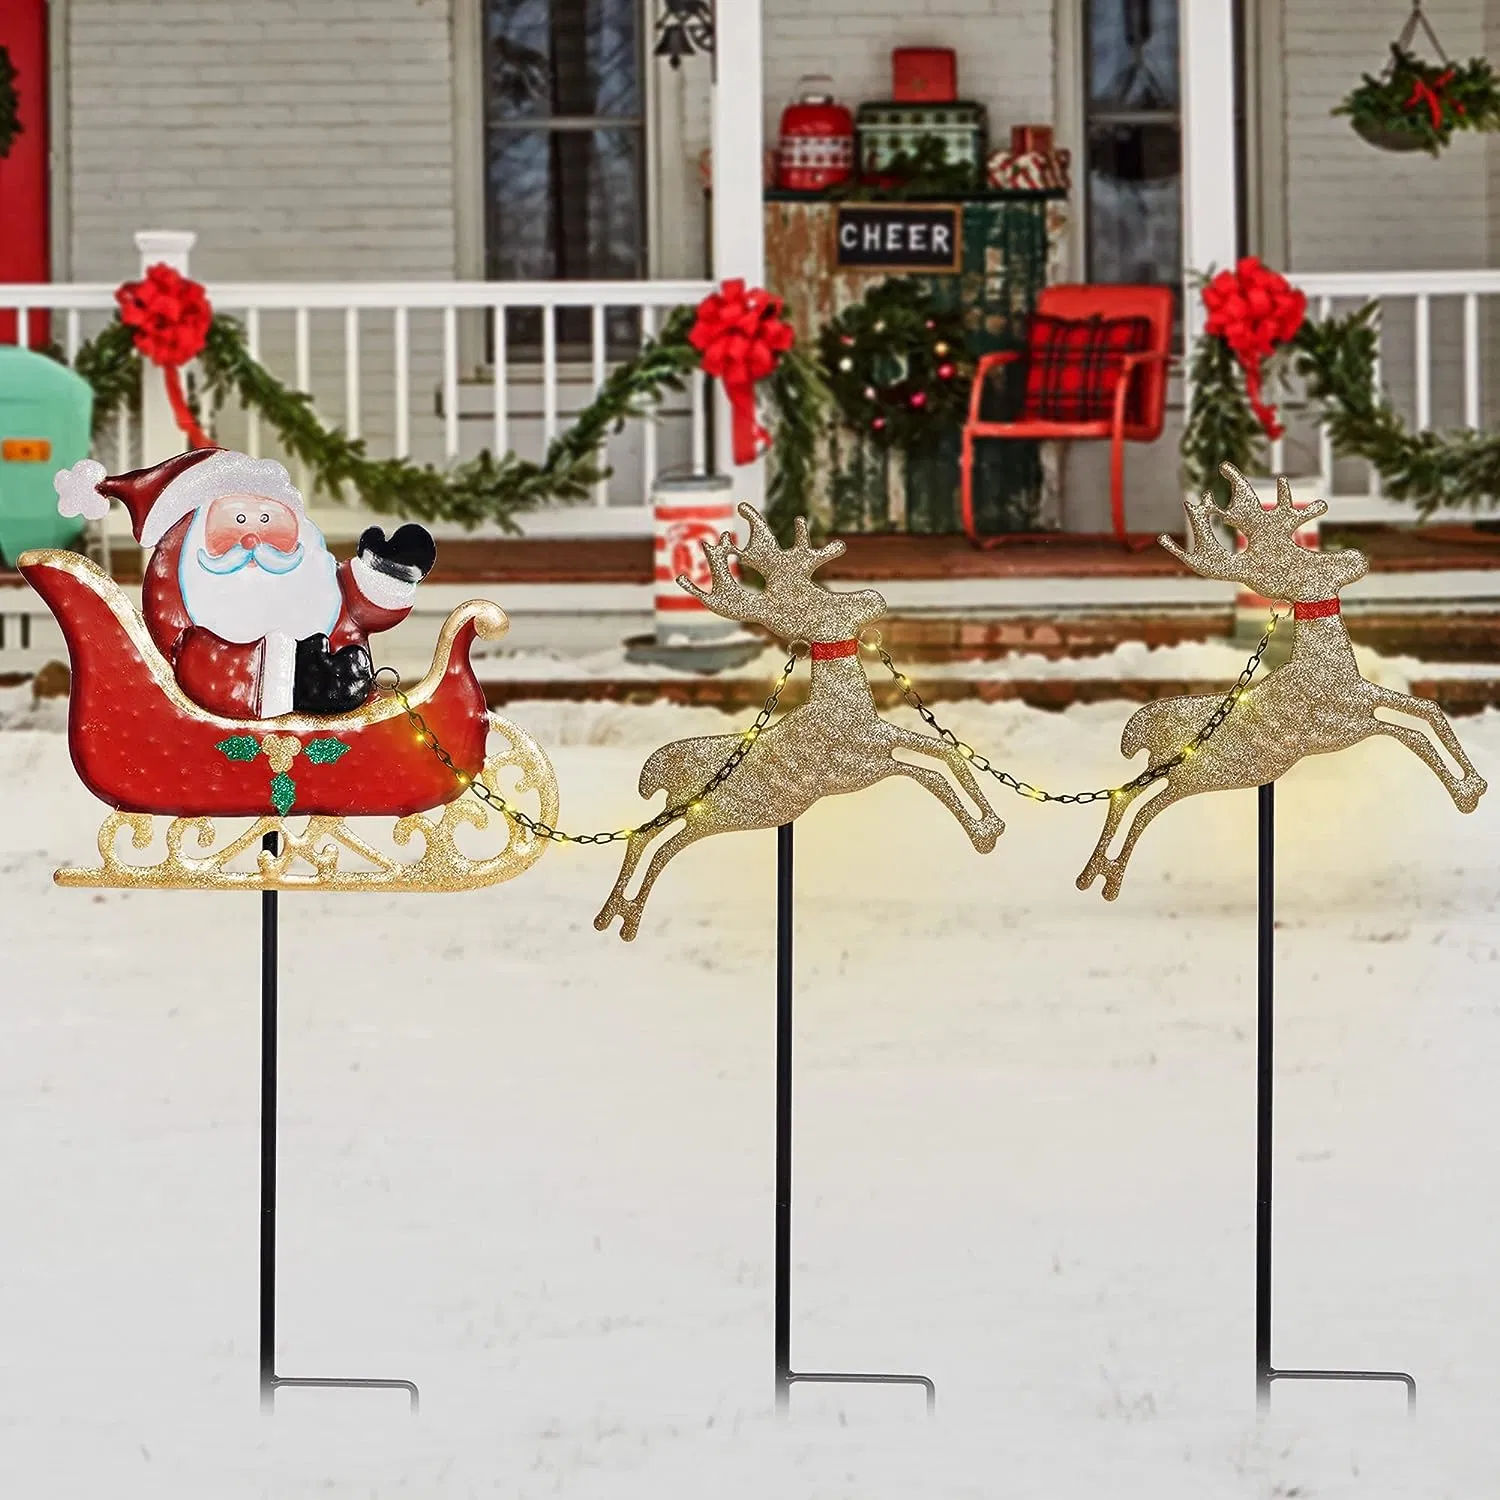 Christmas Garden Stake Decor, Metal Christmas Yard Stakes, Santa Claus Reindeer Christmas Outdoor Yard Lawn Ornaments Holiday Stake Decorations Gift